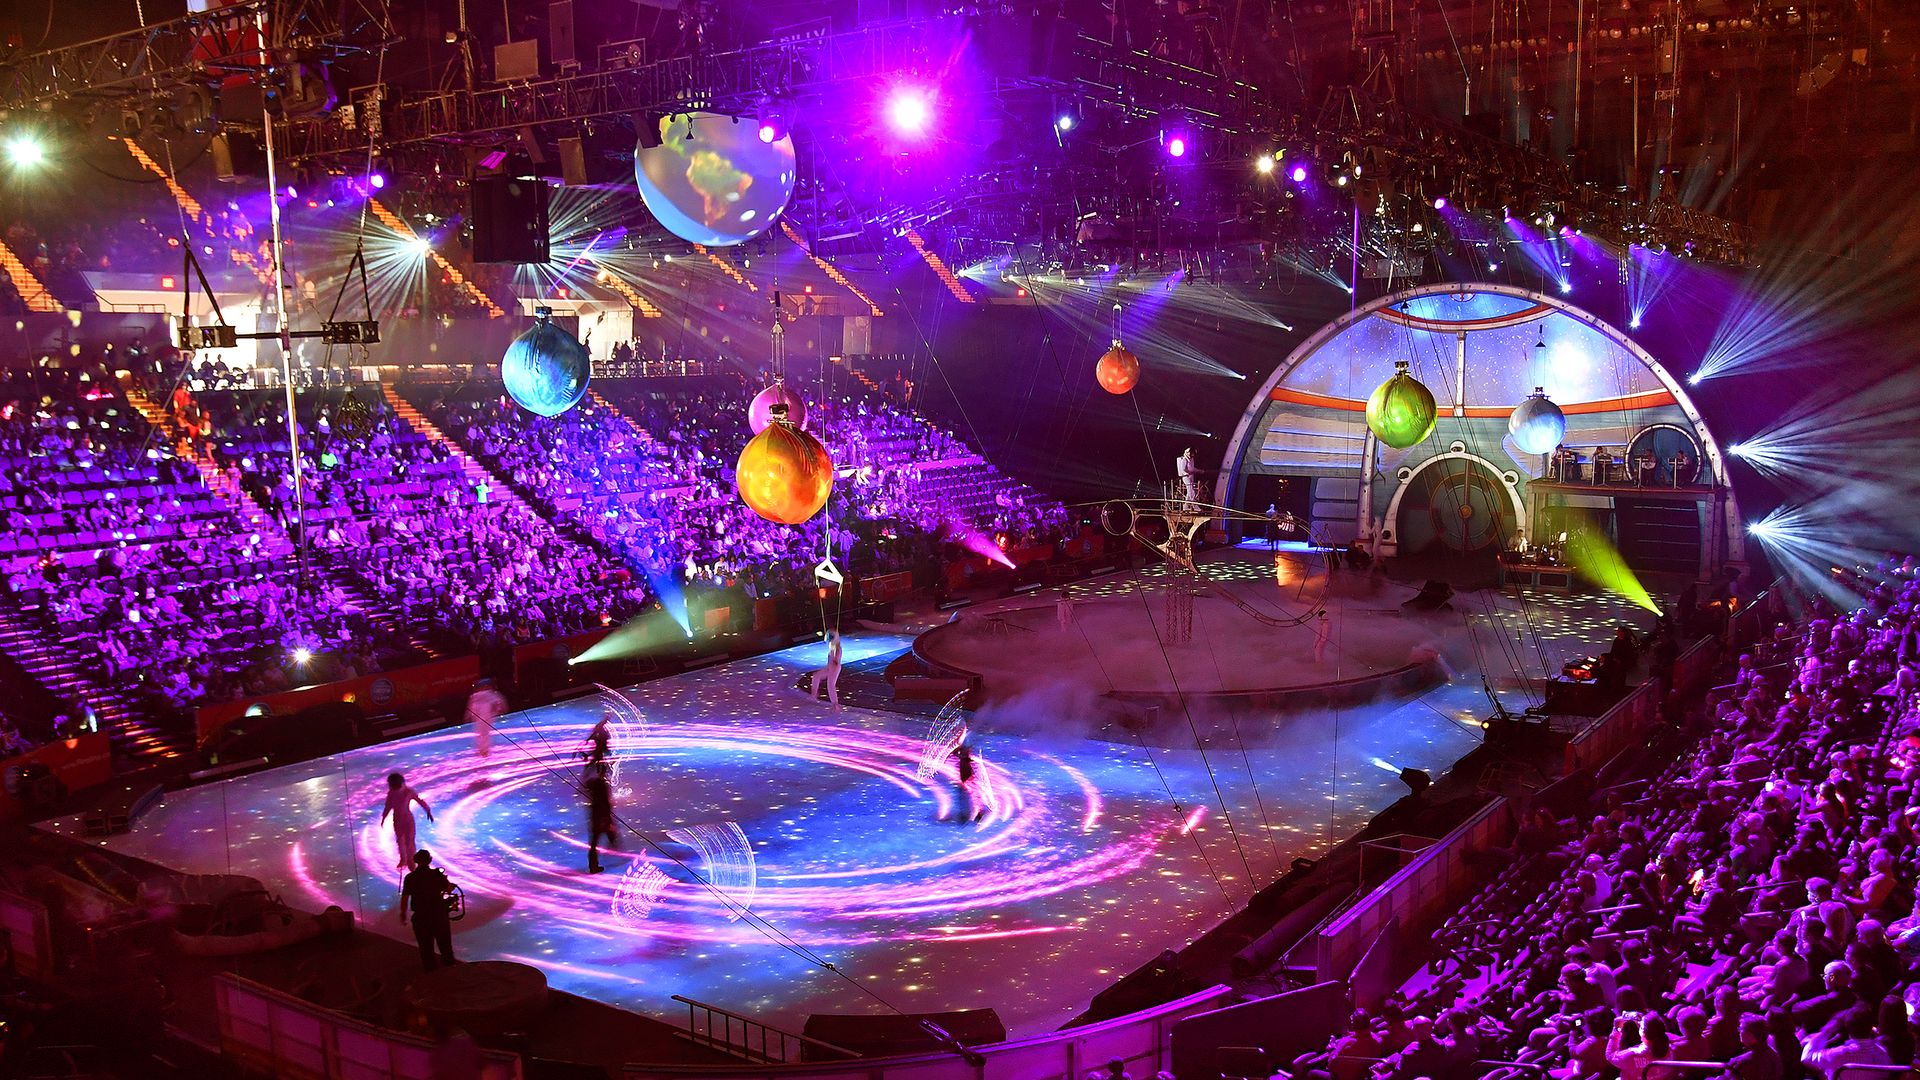 A space-themed Ringling Brothers circus performance.